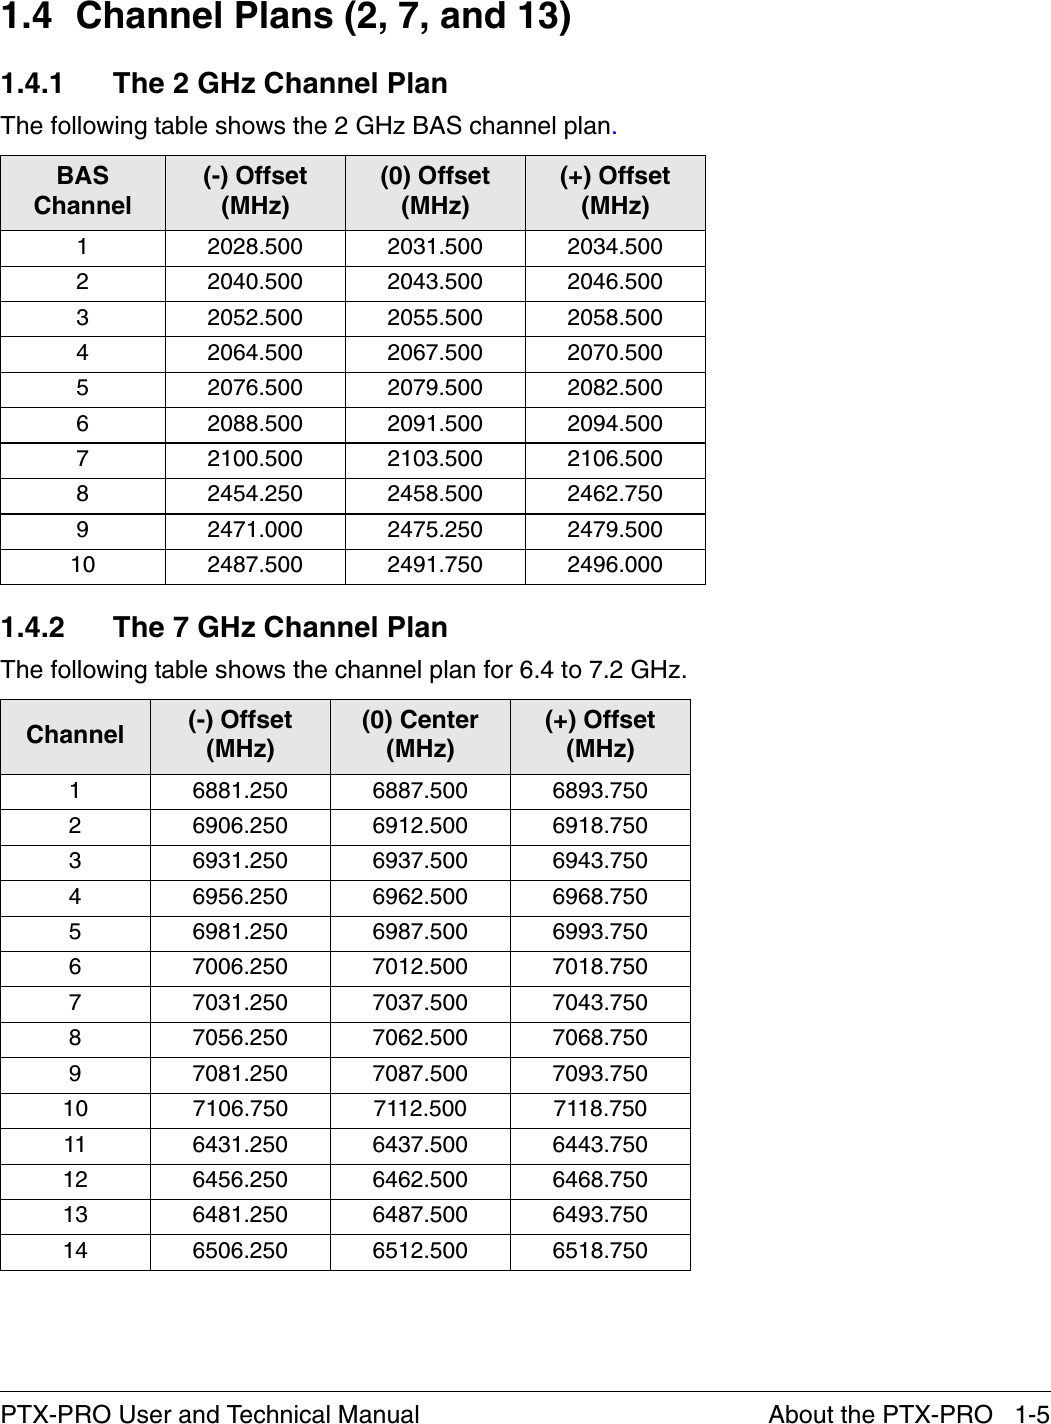 About the PTX-PRO   1-5PTX-PRO User and Technical Manual1.4 Channel Plans (2, 7, and 13)1.4.1 The 2 GHz Channel PlanThe following table shows the 2 GHz BAS channel plan.1.4.2 The 7 GHz Channel PlanThe following table shows the channel plan for 6.4 to 7.2 GHz.BAS Channel(-) Offset (MHz)(0) Offset (MHz)(+) Offset (MHz)1 2028.500 2031.500 2034.5002 2040.500 2043.500 2046.5003 2052.500 2055.500 2058.5004 2064.500 2067.500 2070.5005 2076.500 2079.500 2082.5006 2088.500 2091.500 2094.5007 2100.500 2103.500 2106.5008 2454.250 2458.500 2462.7509 2471.000 2475.250 2479.50010 2487.500 2491.750 2496.000Channel (-) Offset (MHz)(0) Center (MHz)(+) Offset (MHz)1 6881.250 6887.500 6893.7502 6906.250 6912.500 6918.7503 6931.250 6937.500 6943.7504 6956.250 6962.500 6968.7505 6981.250 6987.500 6993.7506 7006.250 7012.500 7018.7507 7031.250 7037.500 7043.7508 7056.250 7062.500 7068.7509 7081.250 7087.500 7093.75010 7106.750 7112.500 7118.75011 6431.250 6437.500 6443.75012 6456.250 6462.500 6468.75013 6481.250 6487.500 6493.75014 6506.250 6512.500 6518.750